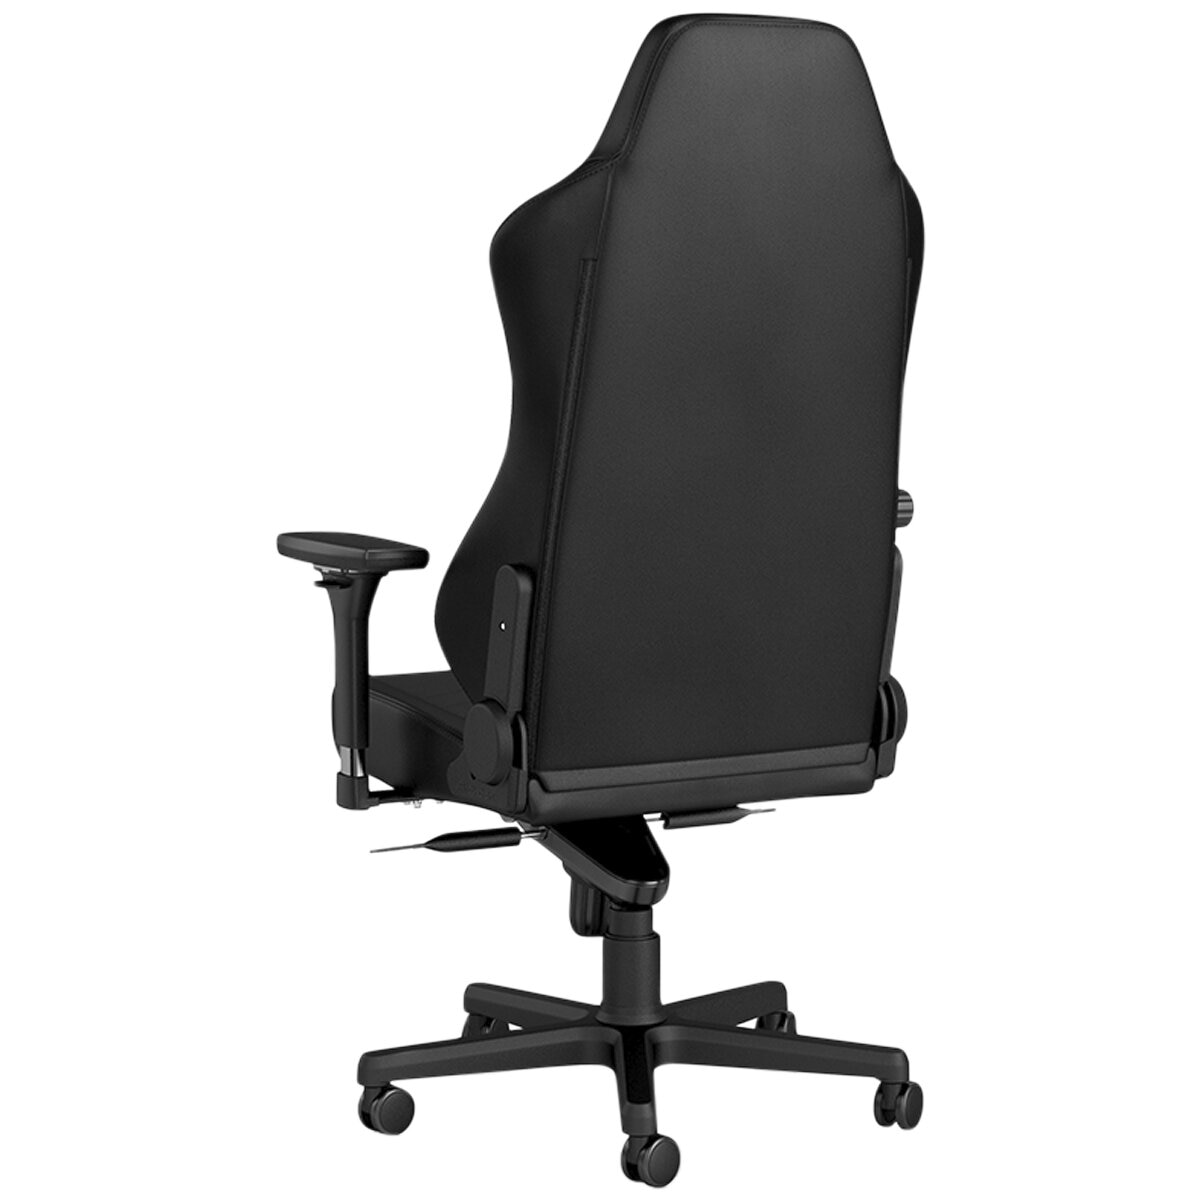 Noblechairs HERO Gaming Chair Top Grain Leather Black